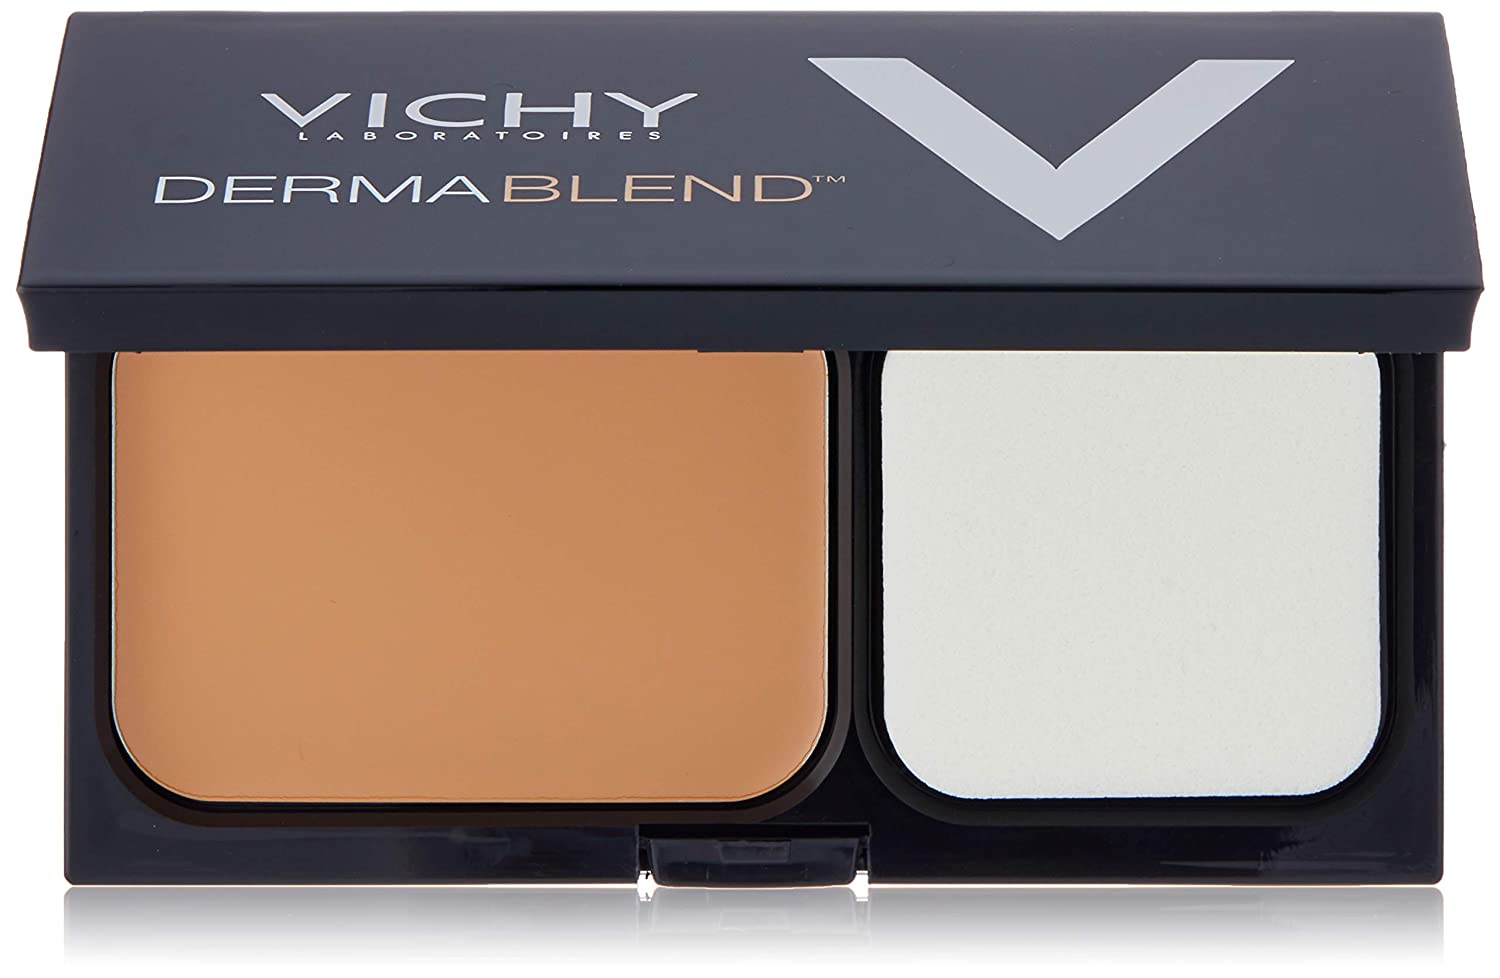 Vichy Dermablend Compact Foundation 12H SPF30 (1 Pack of 1232)